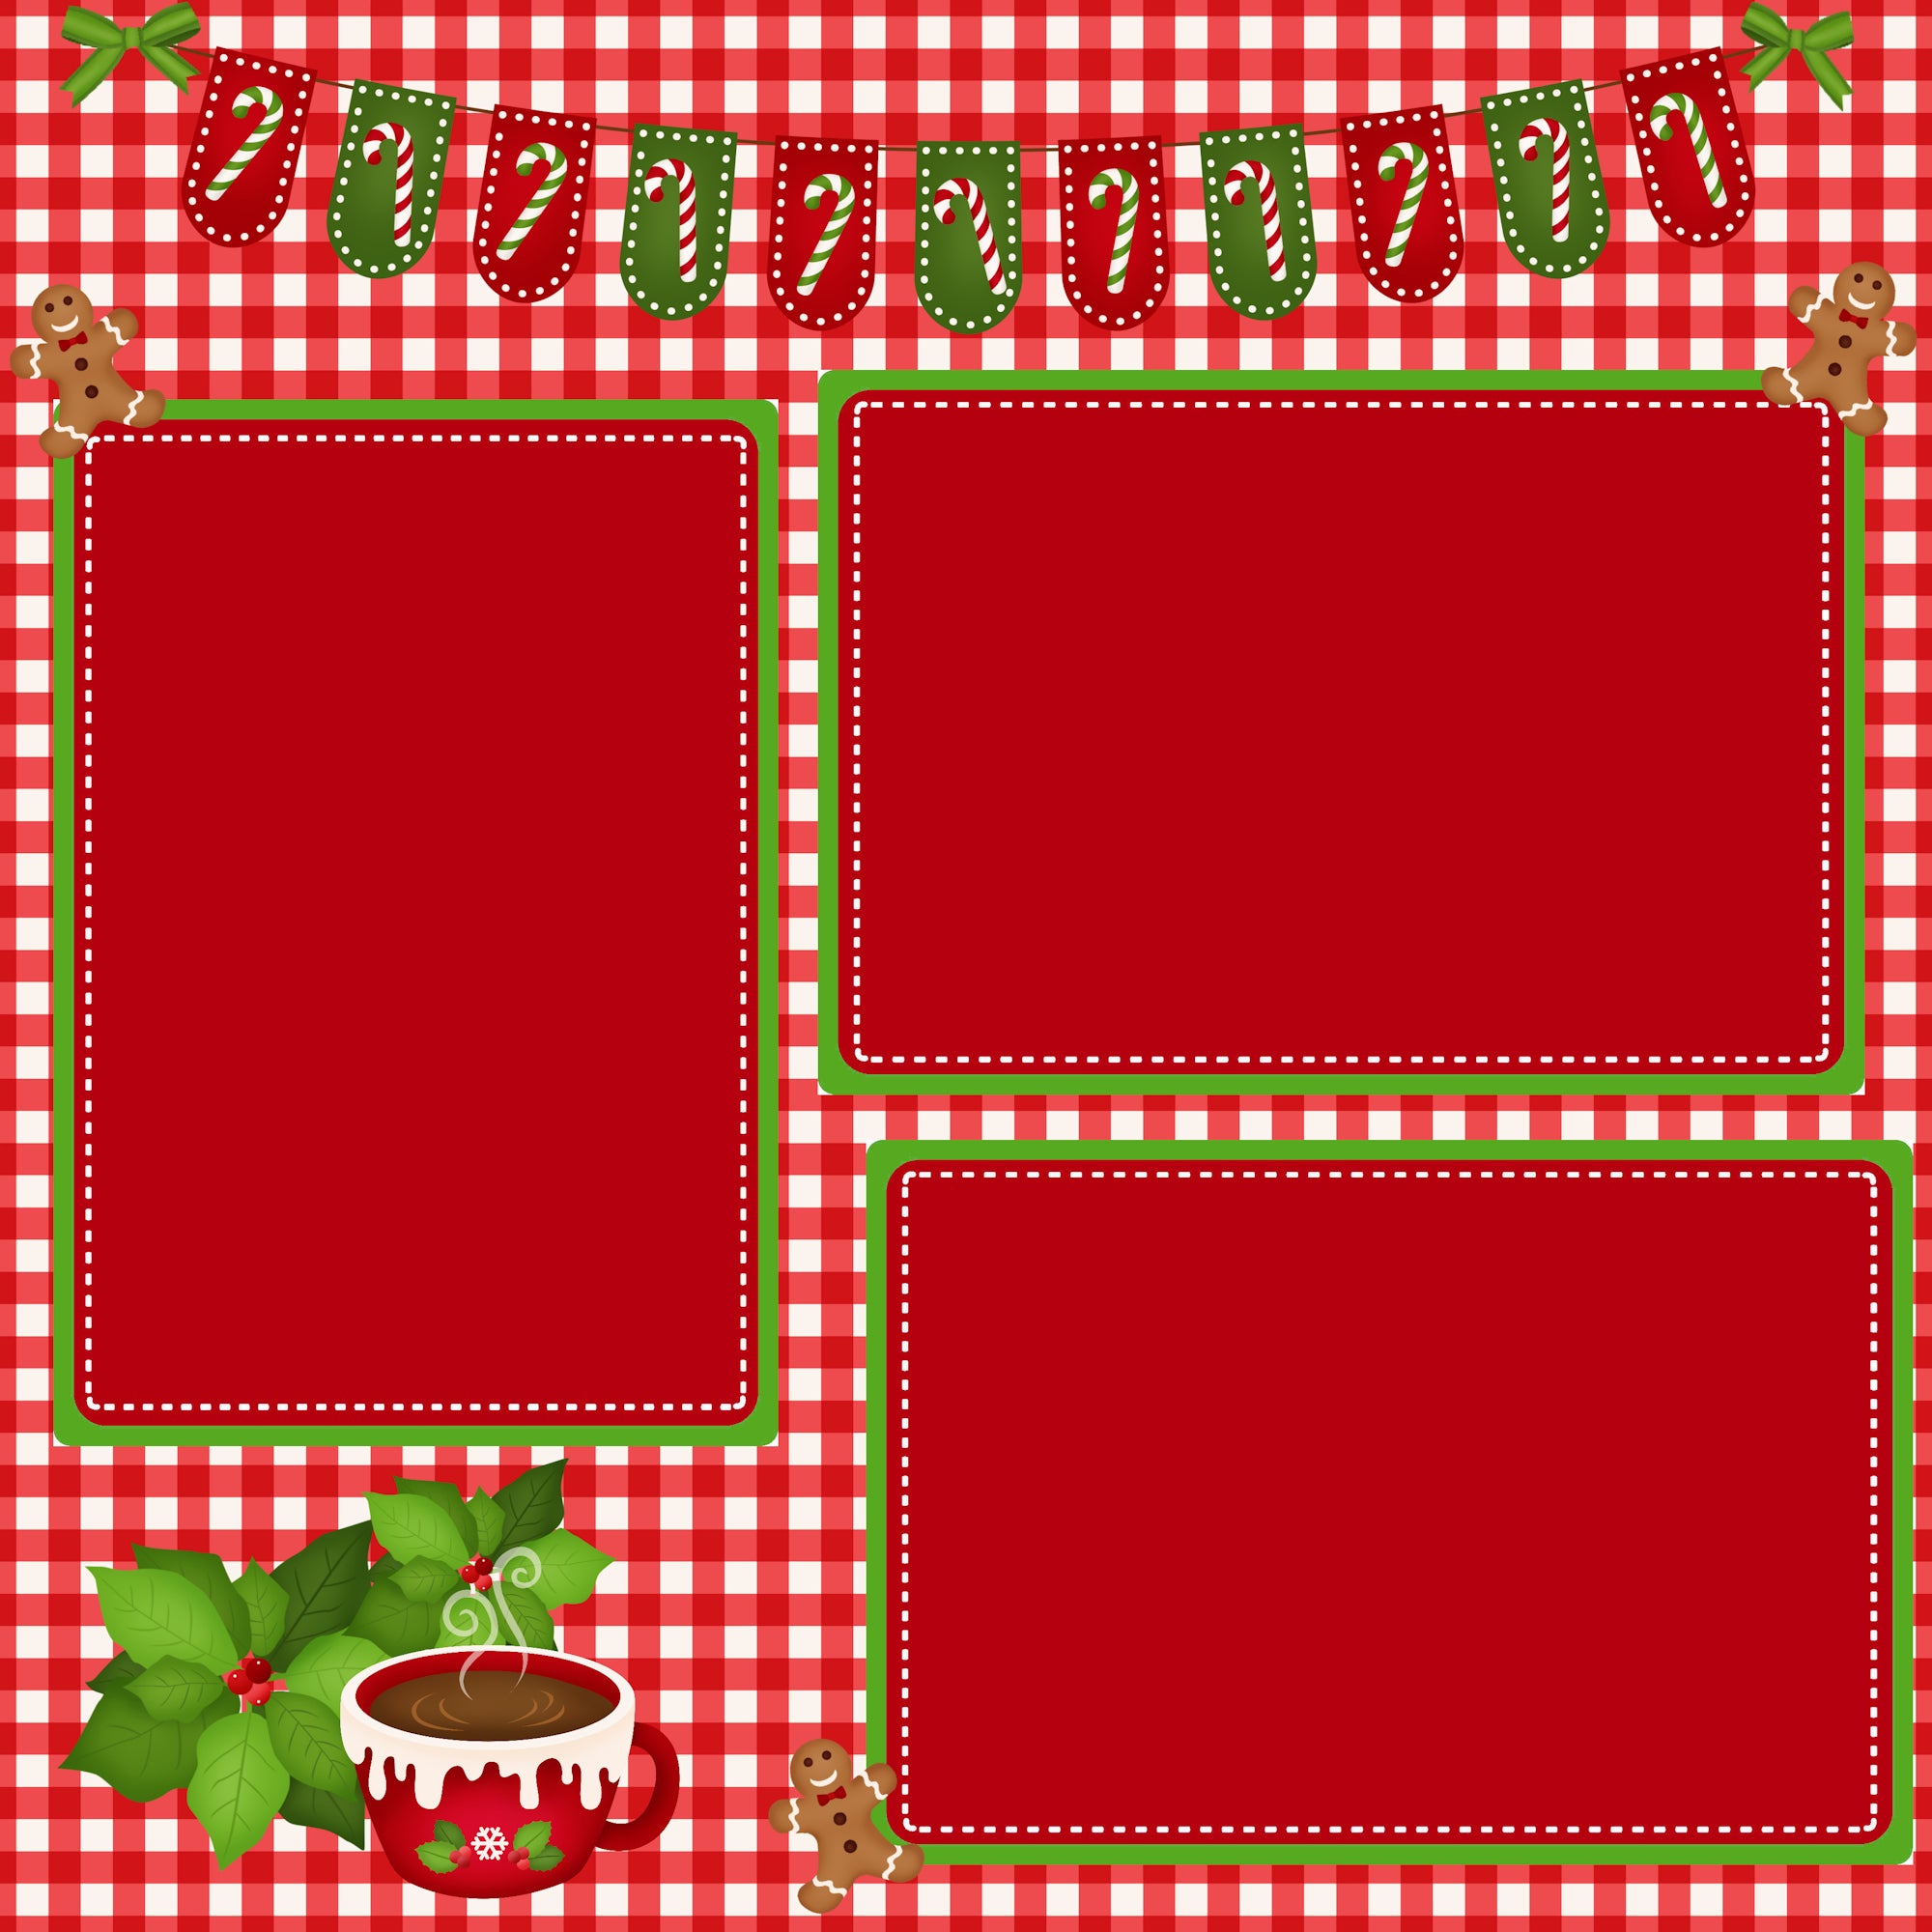 Christmas Baking We Whisk You A Merry Christmas (2) - 12 x 12 Premade, Printed Scrapbook Pages by SSC Designs